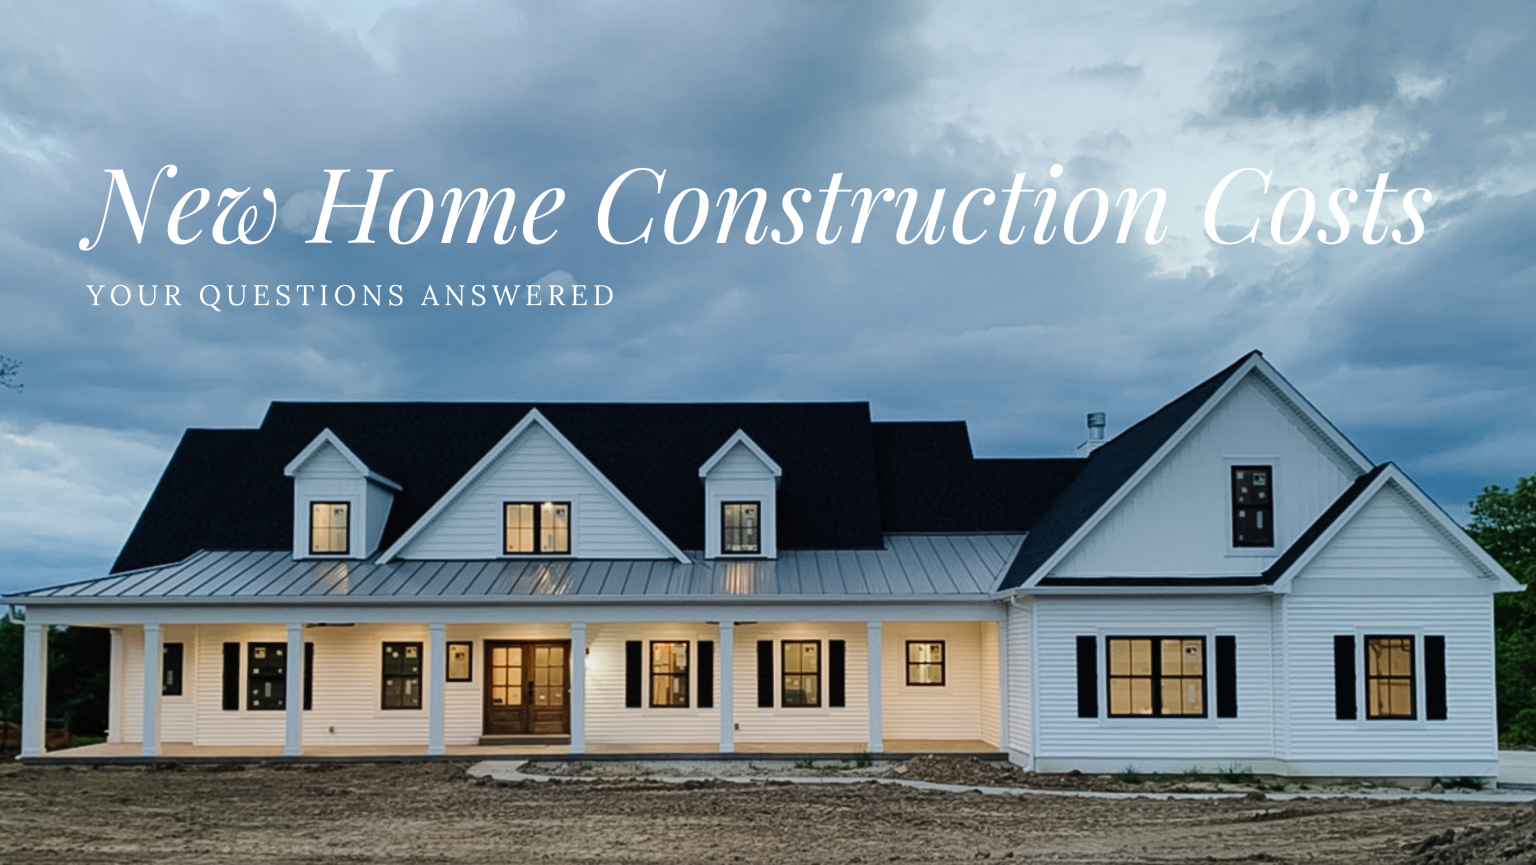 New Home Construction Costs Questions